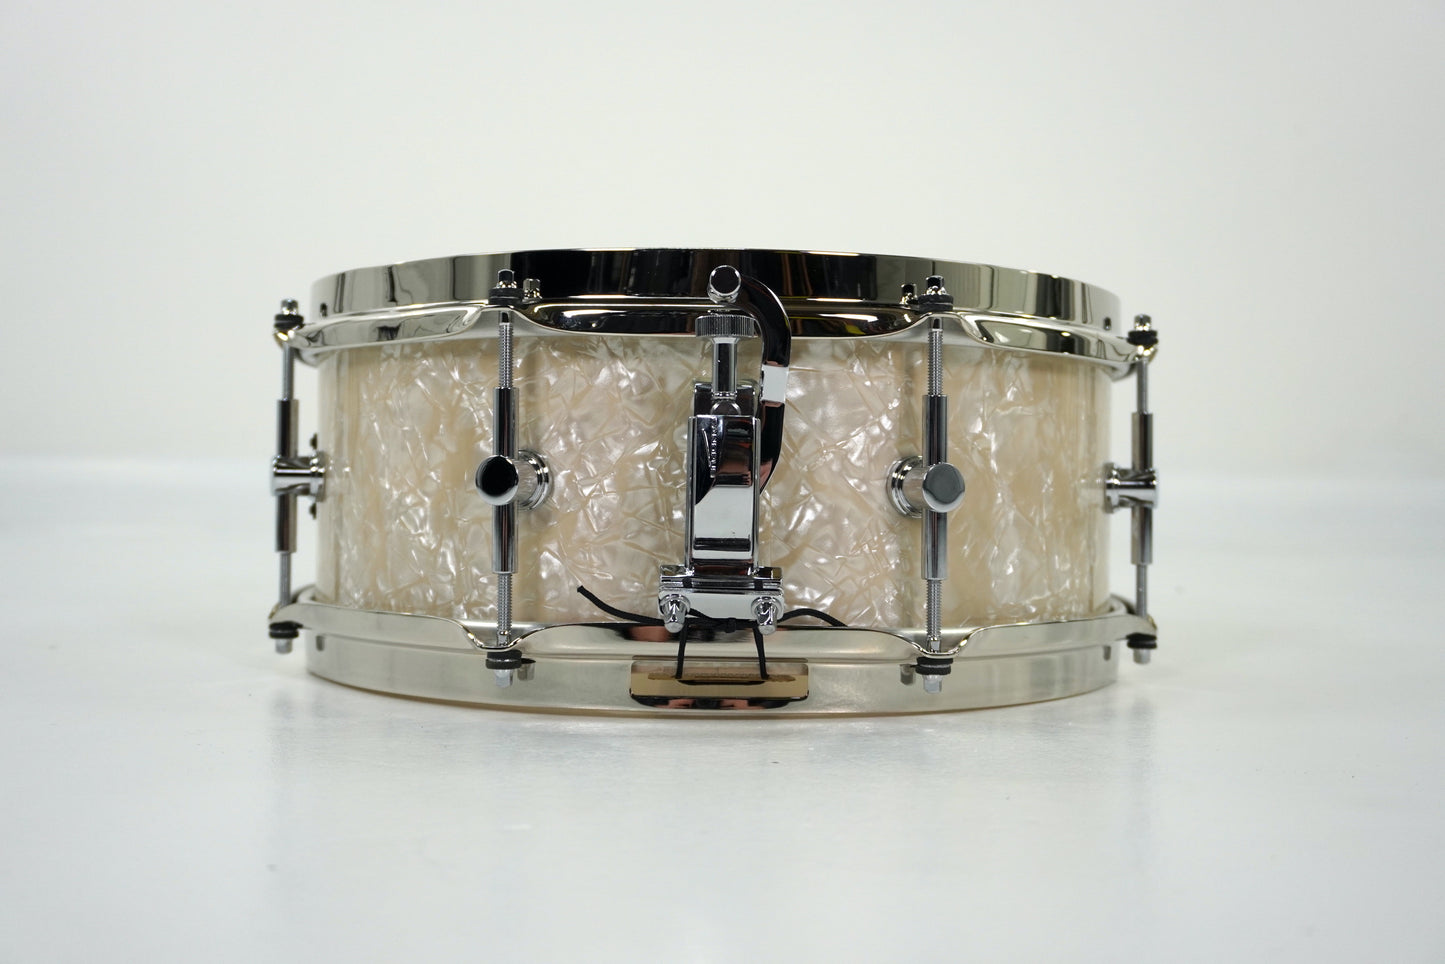 Canopus NV50 M1 14 x 5.5 Snare White Pearl